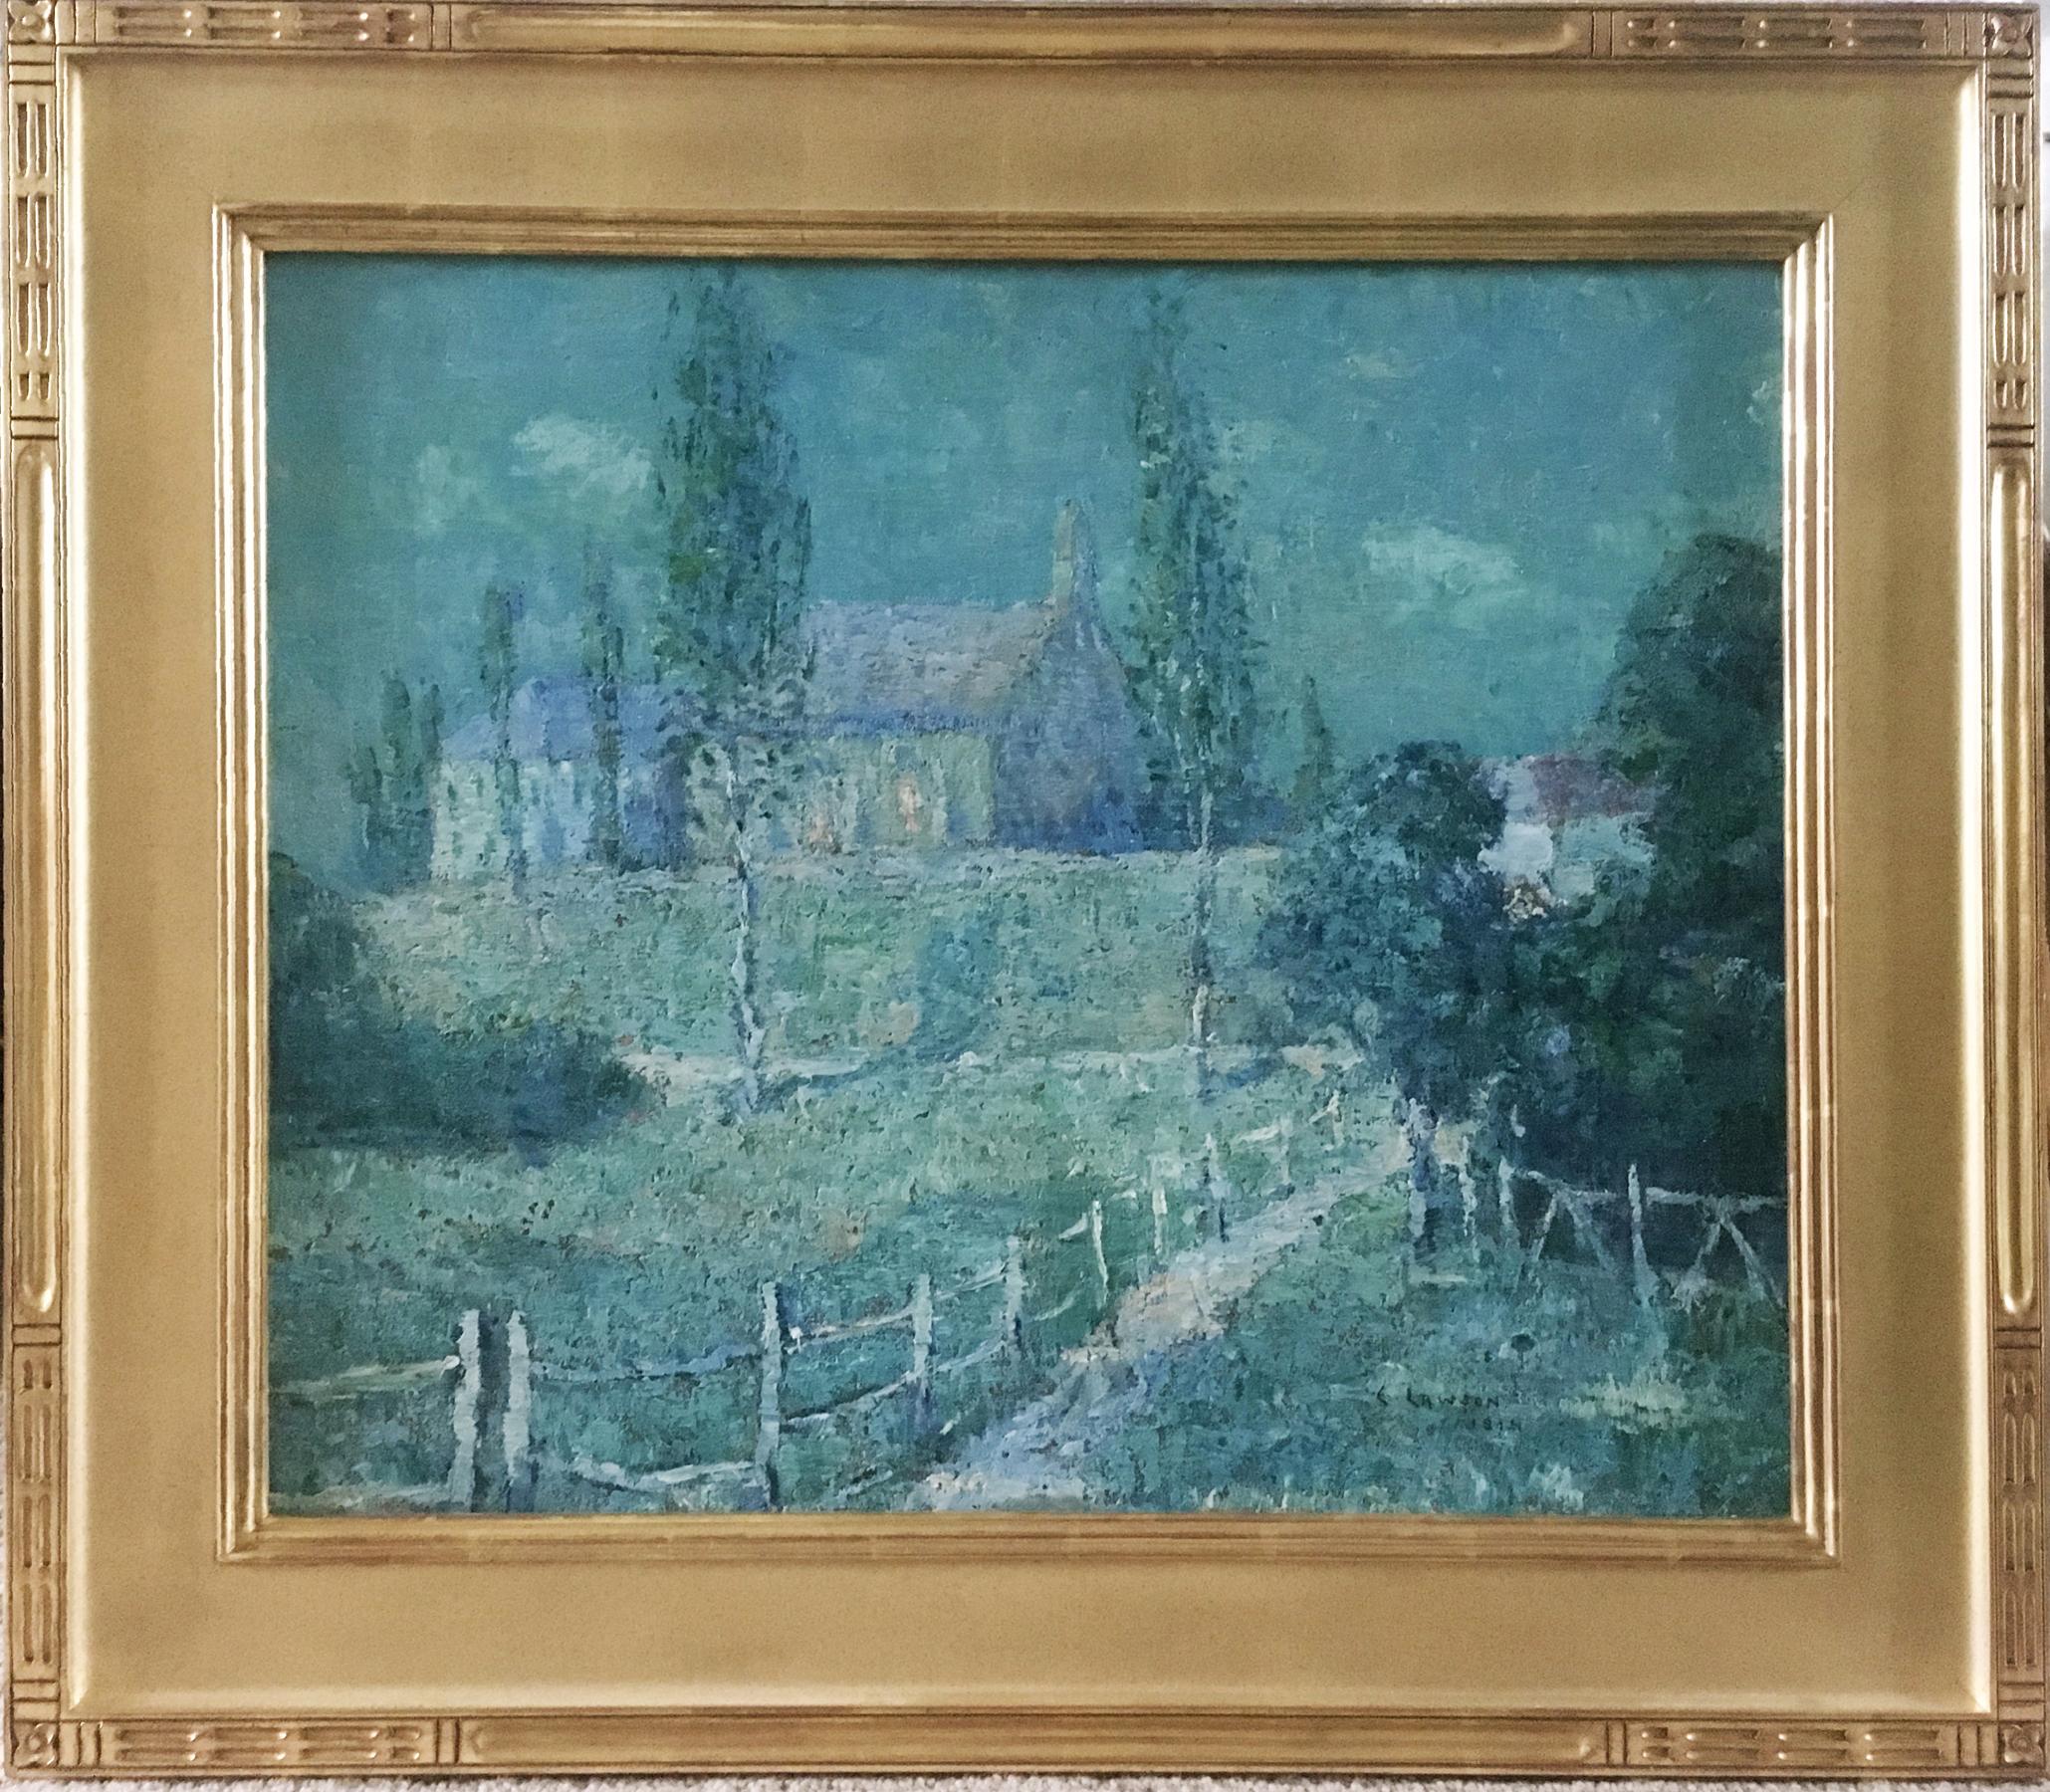 "Evening Scene" by Ernest Lawson is a 20" x 24" oil on canvas impressionist landscape, painted in 1914. The painting is signed "E Lawson 1914" in the lower right. It is framed in a 22K reproduction frame. The provenance is: Bianco Gallery, private